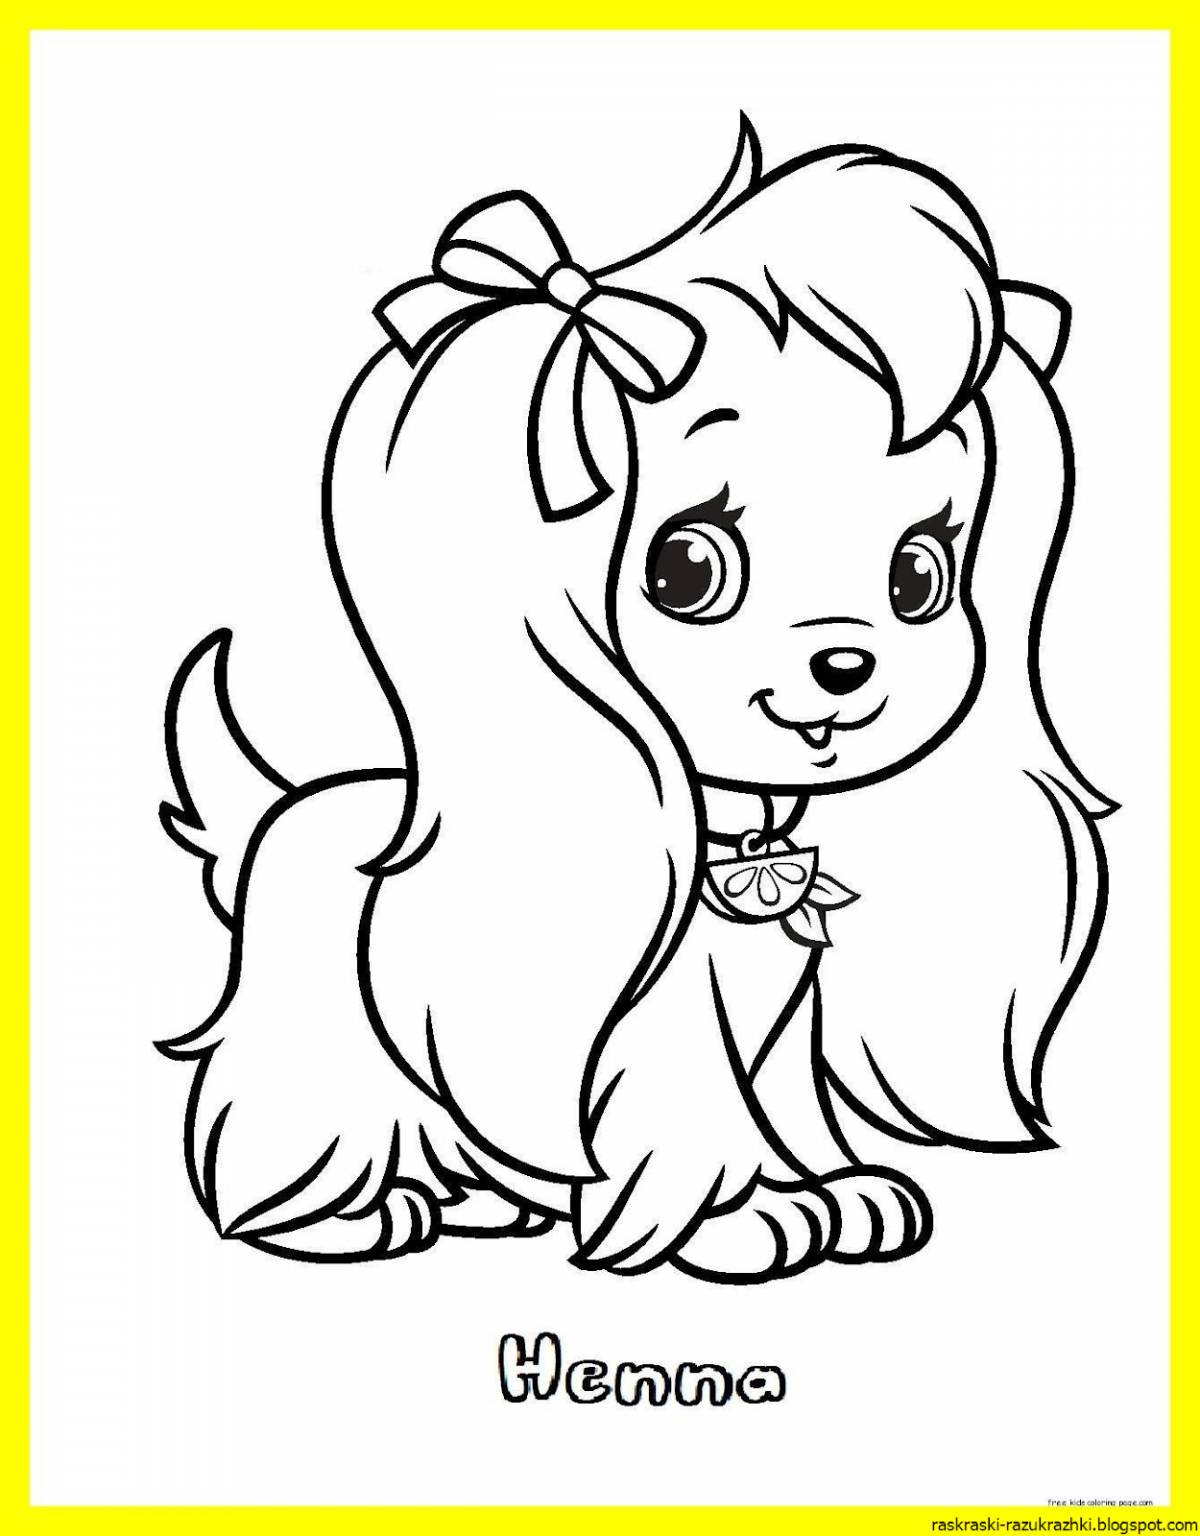 Bright dog coloring book for kids